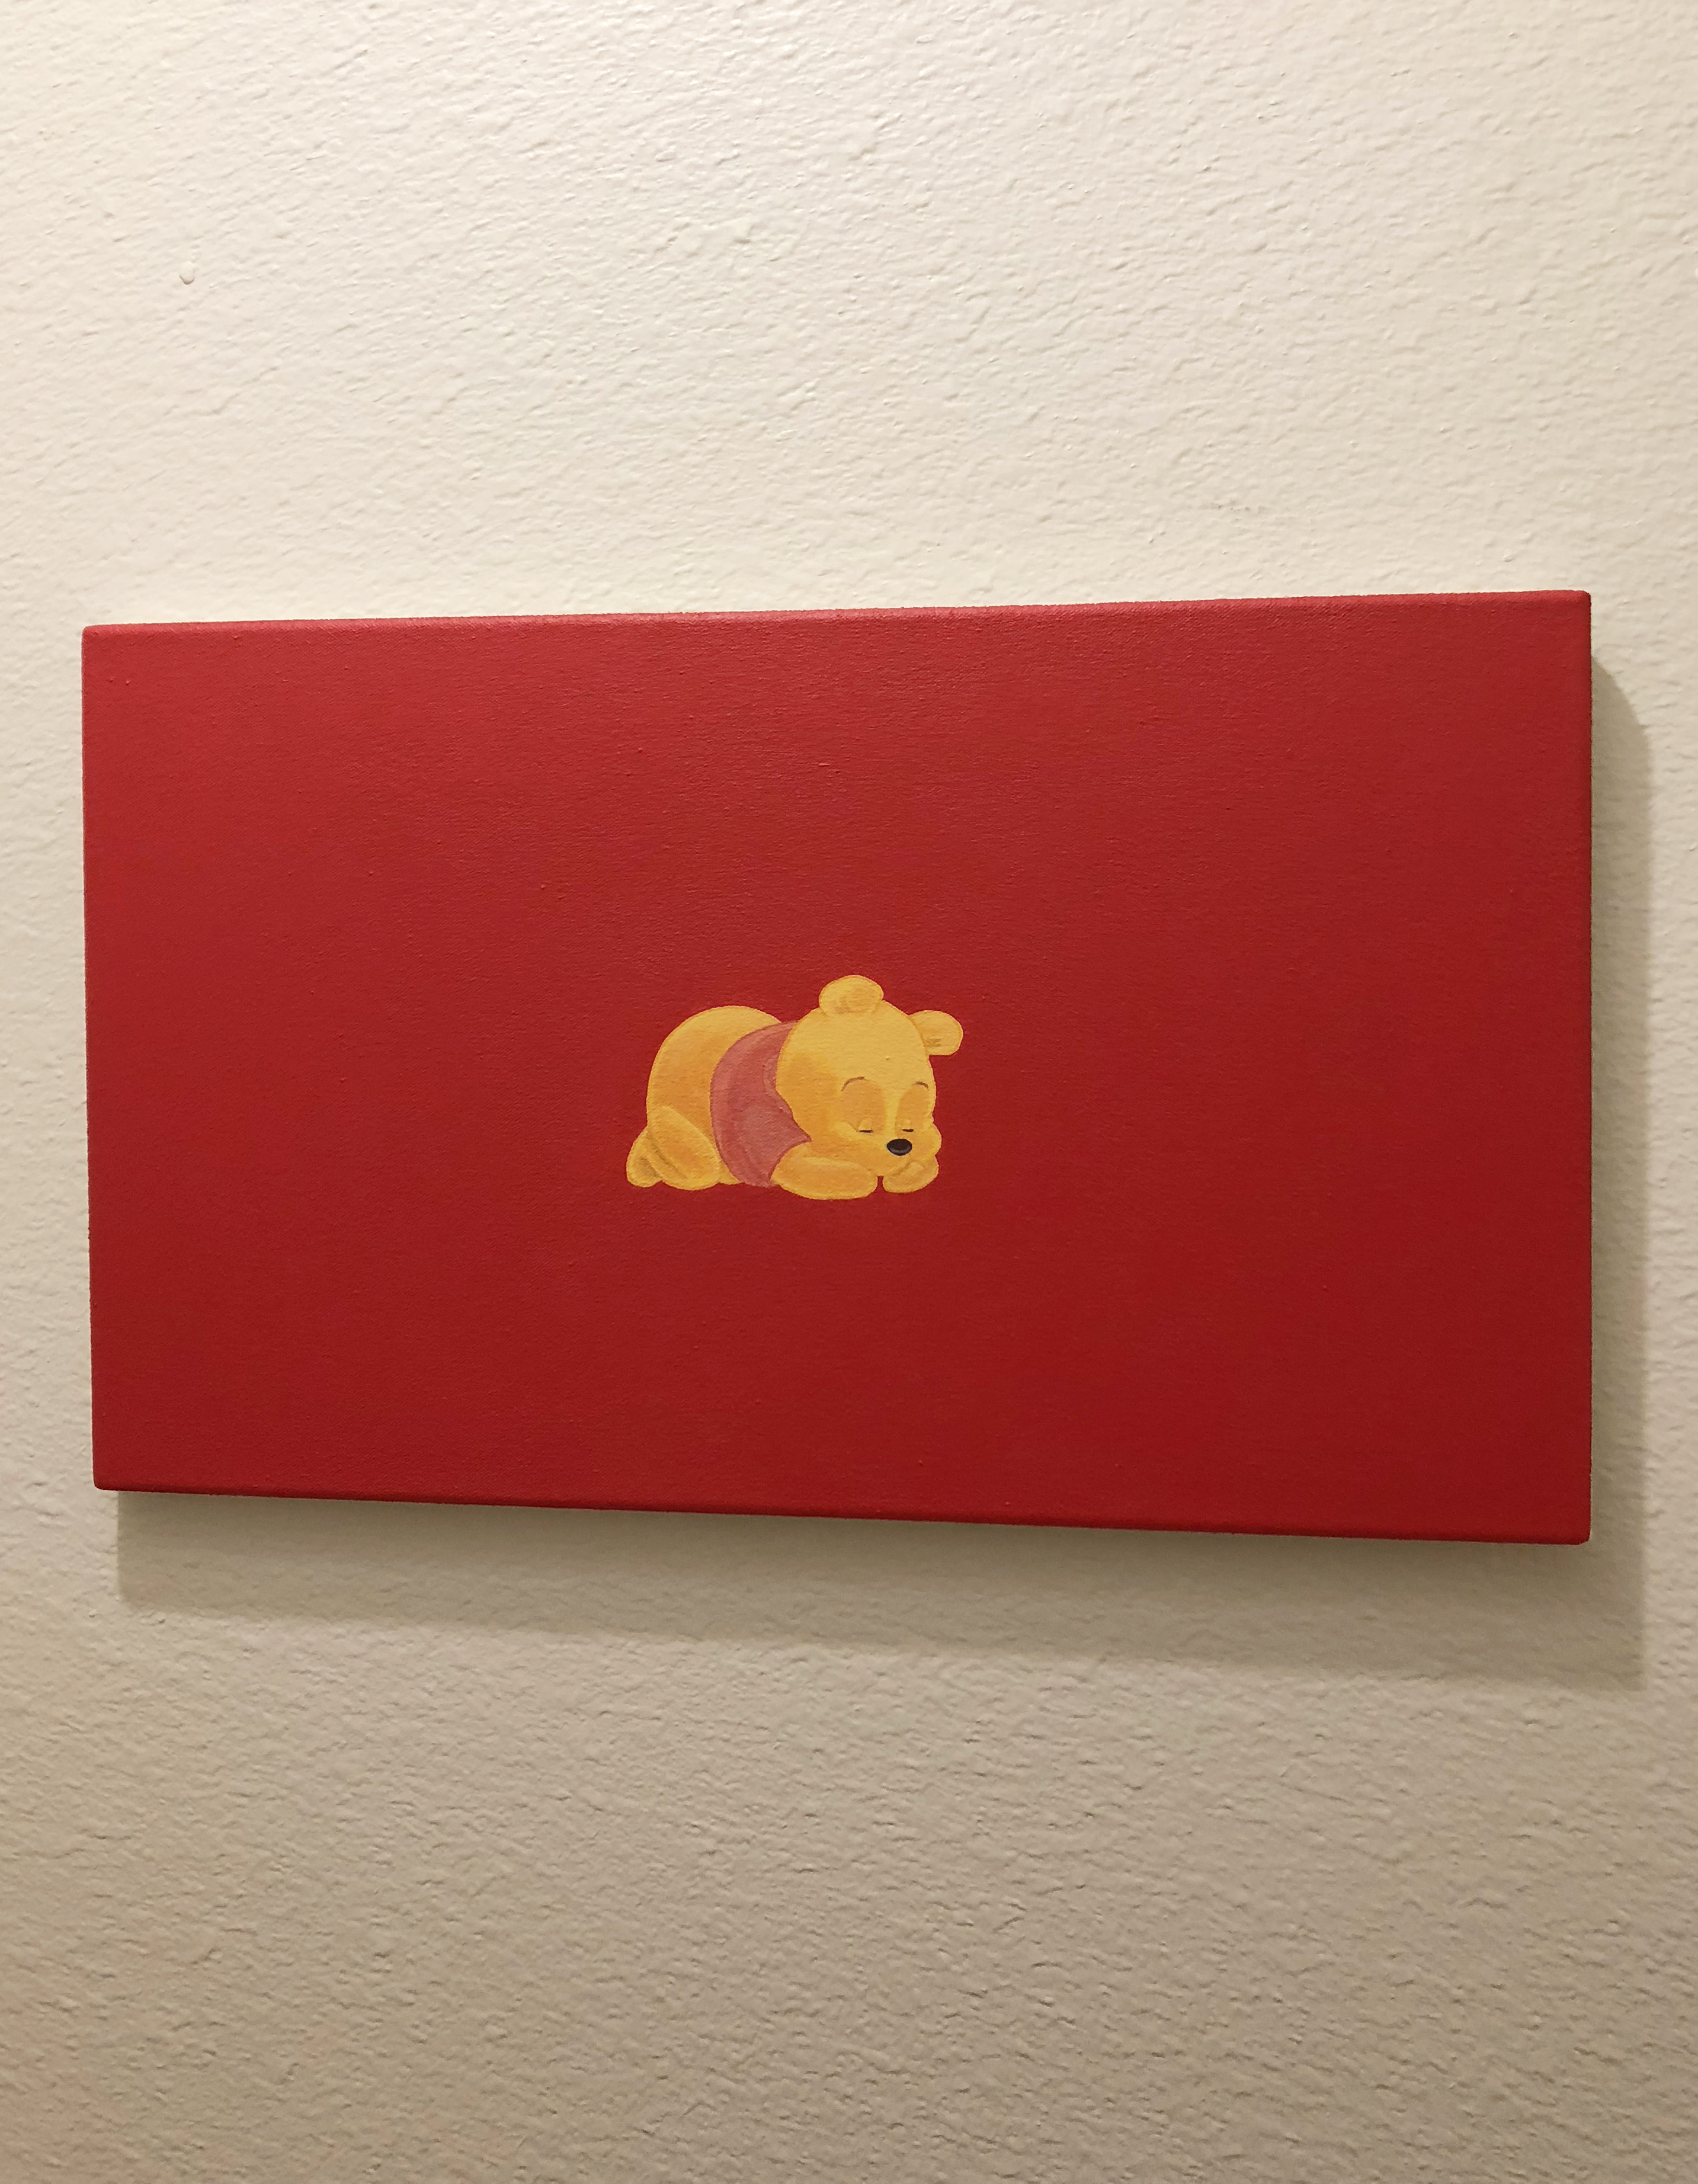 Painting of winnie the pooh lying asleep on a red background hung on a white wall